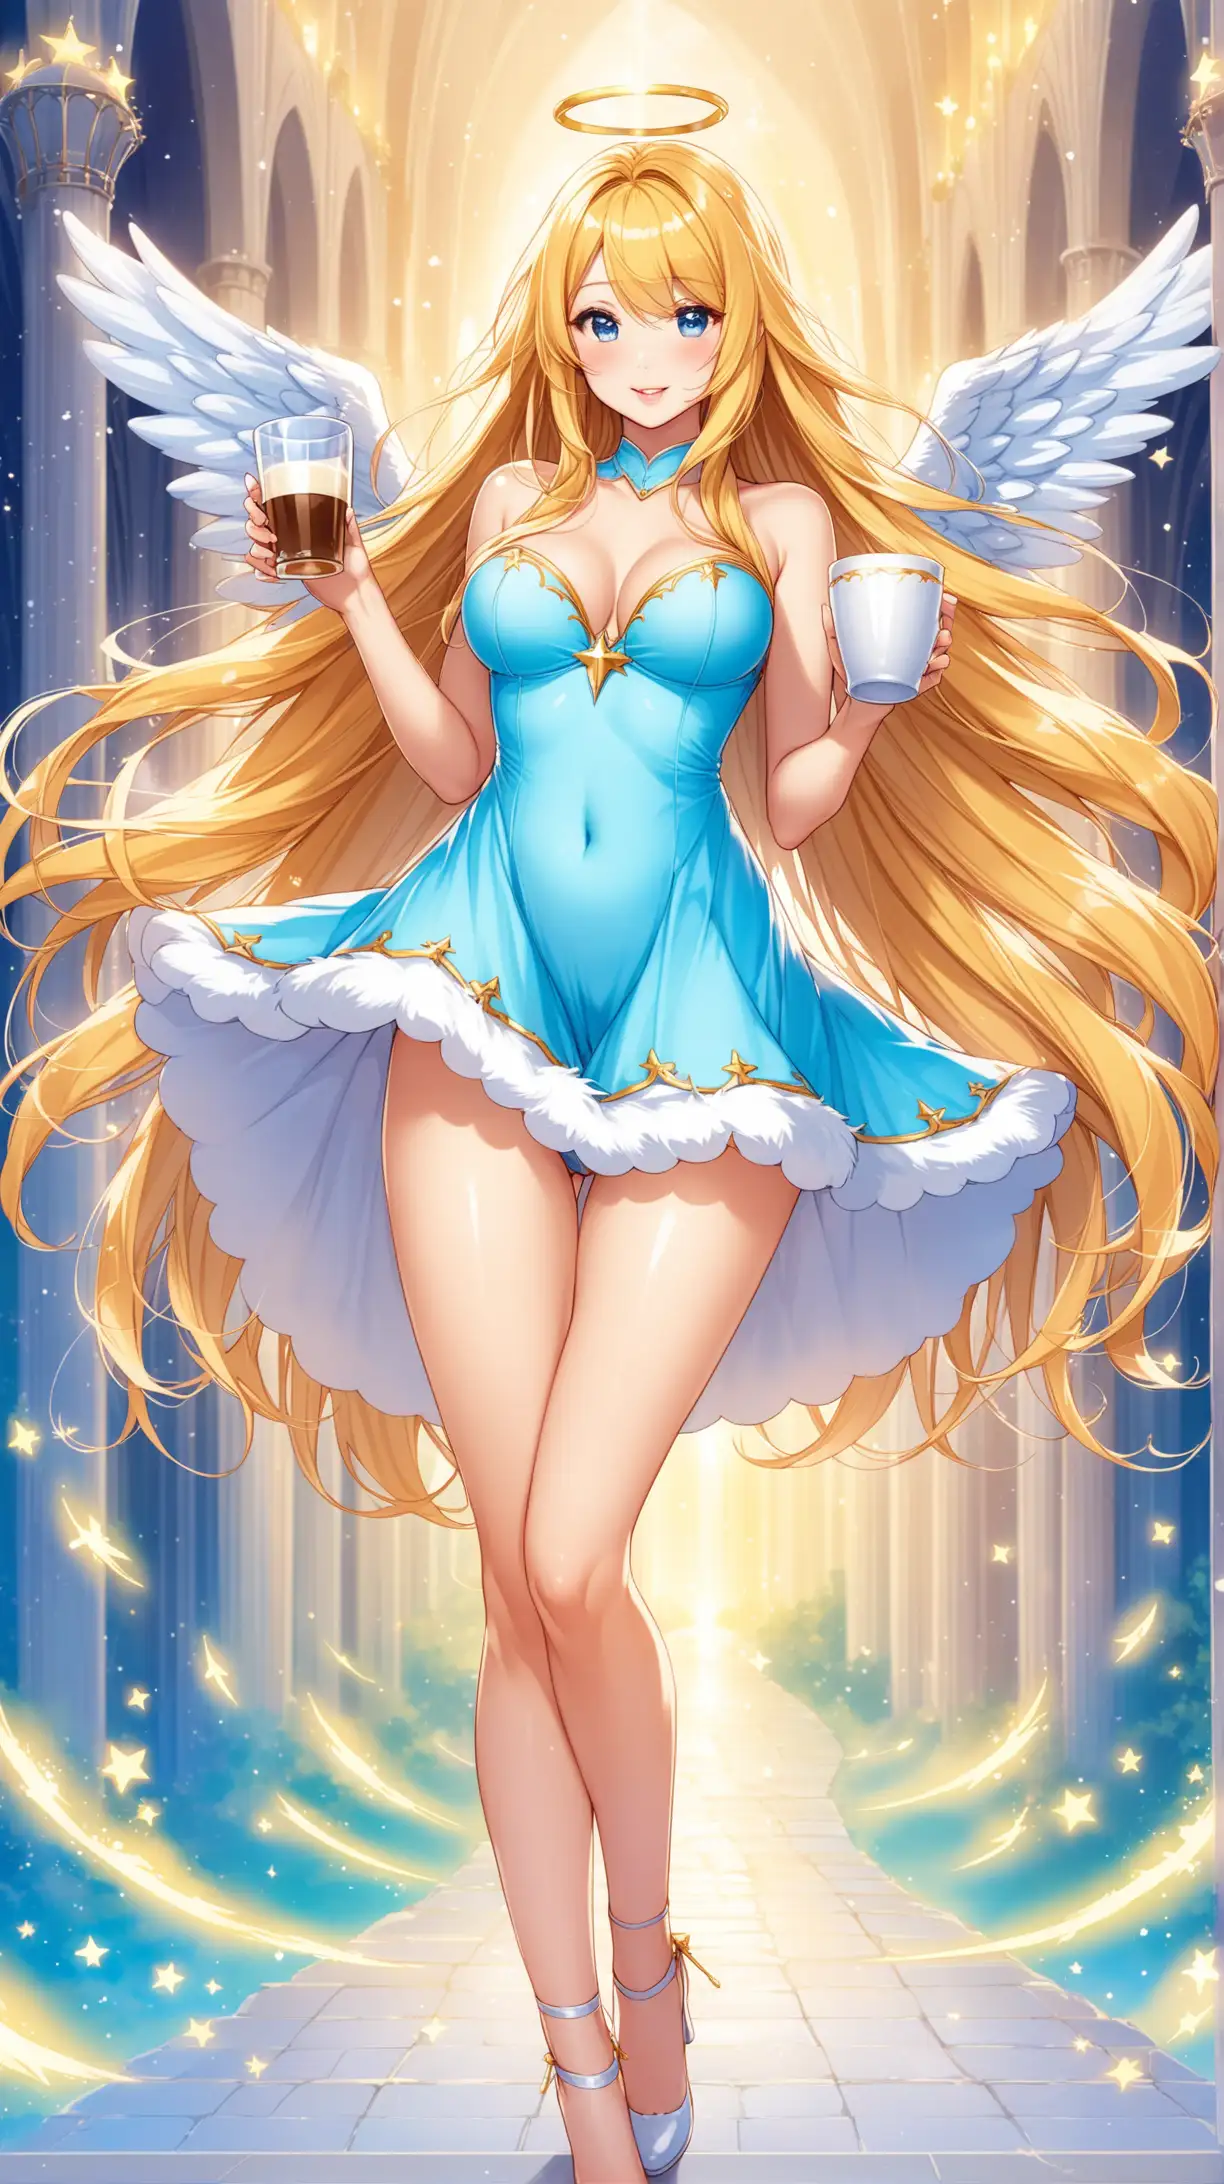 Playful Blonde Angels Carrying Cups in Fantasy Setting